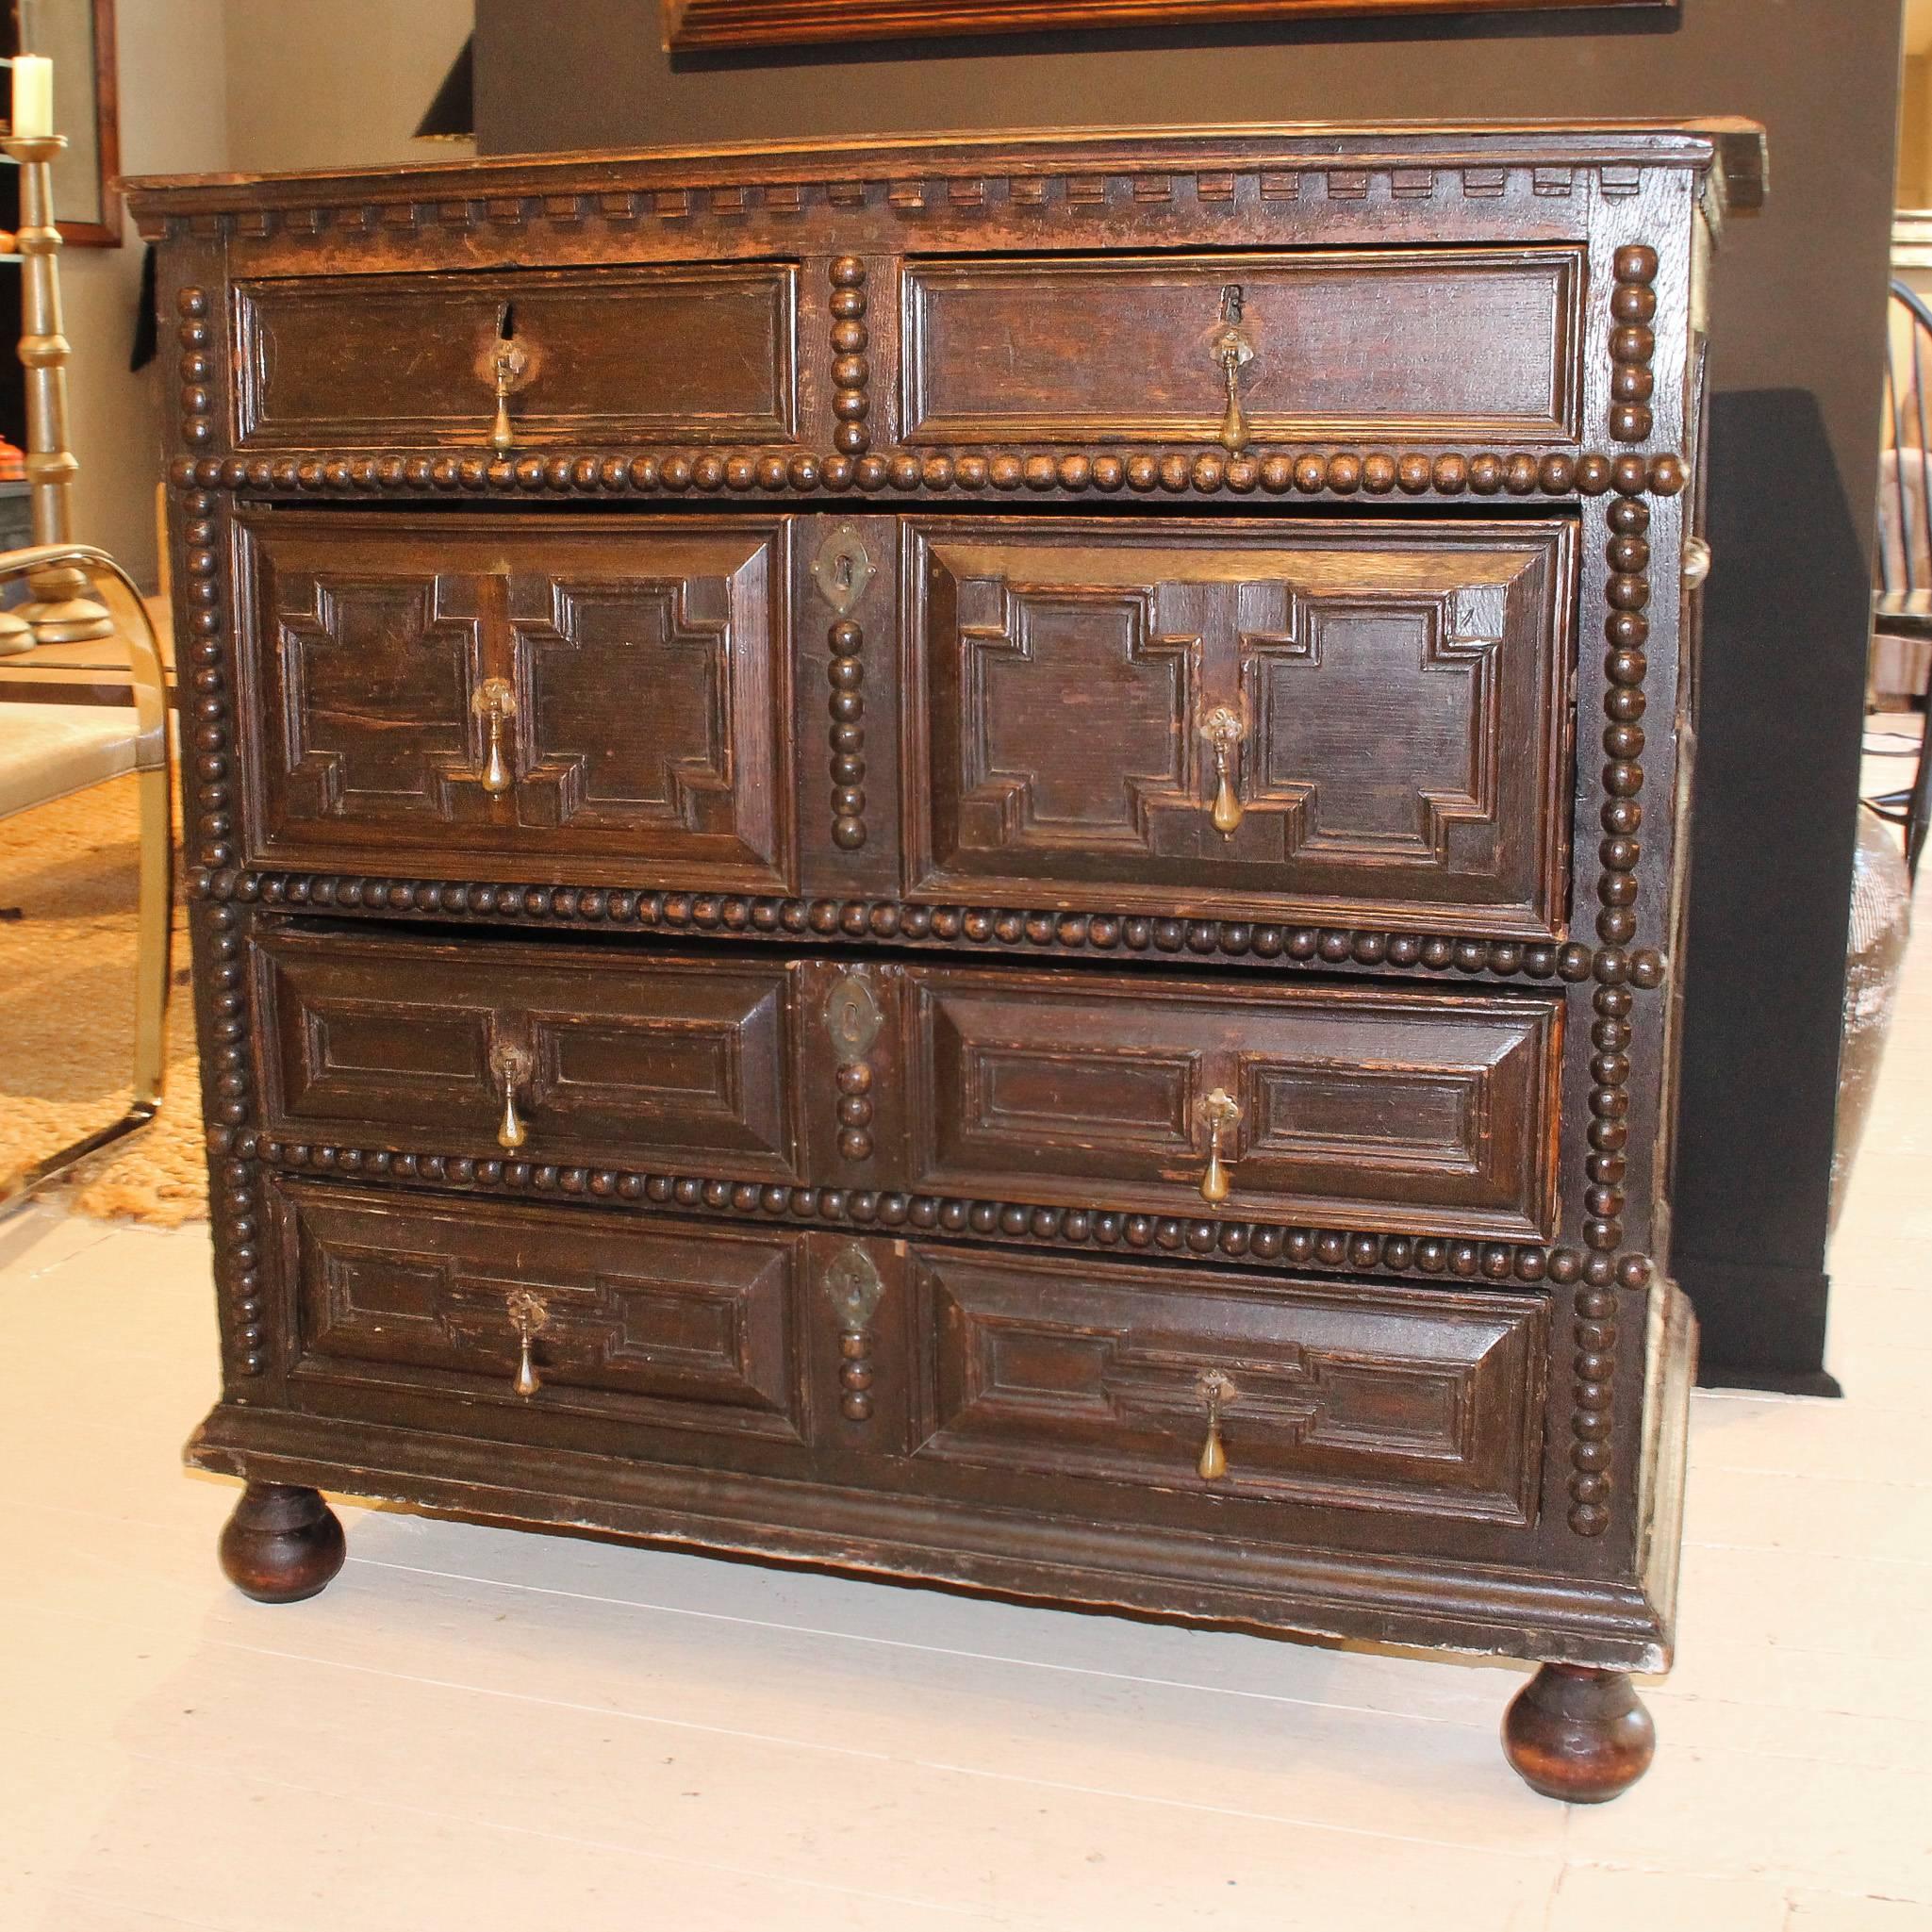 Period 17th-Early 18th century five-drawer pilgrim chest, Probably from Massachusetts or New Hampshire. Chest has dentil moulding and applied decorative turnings that are typical of furniture made in the Plymouth area.